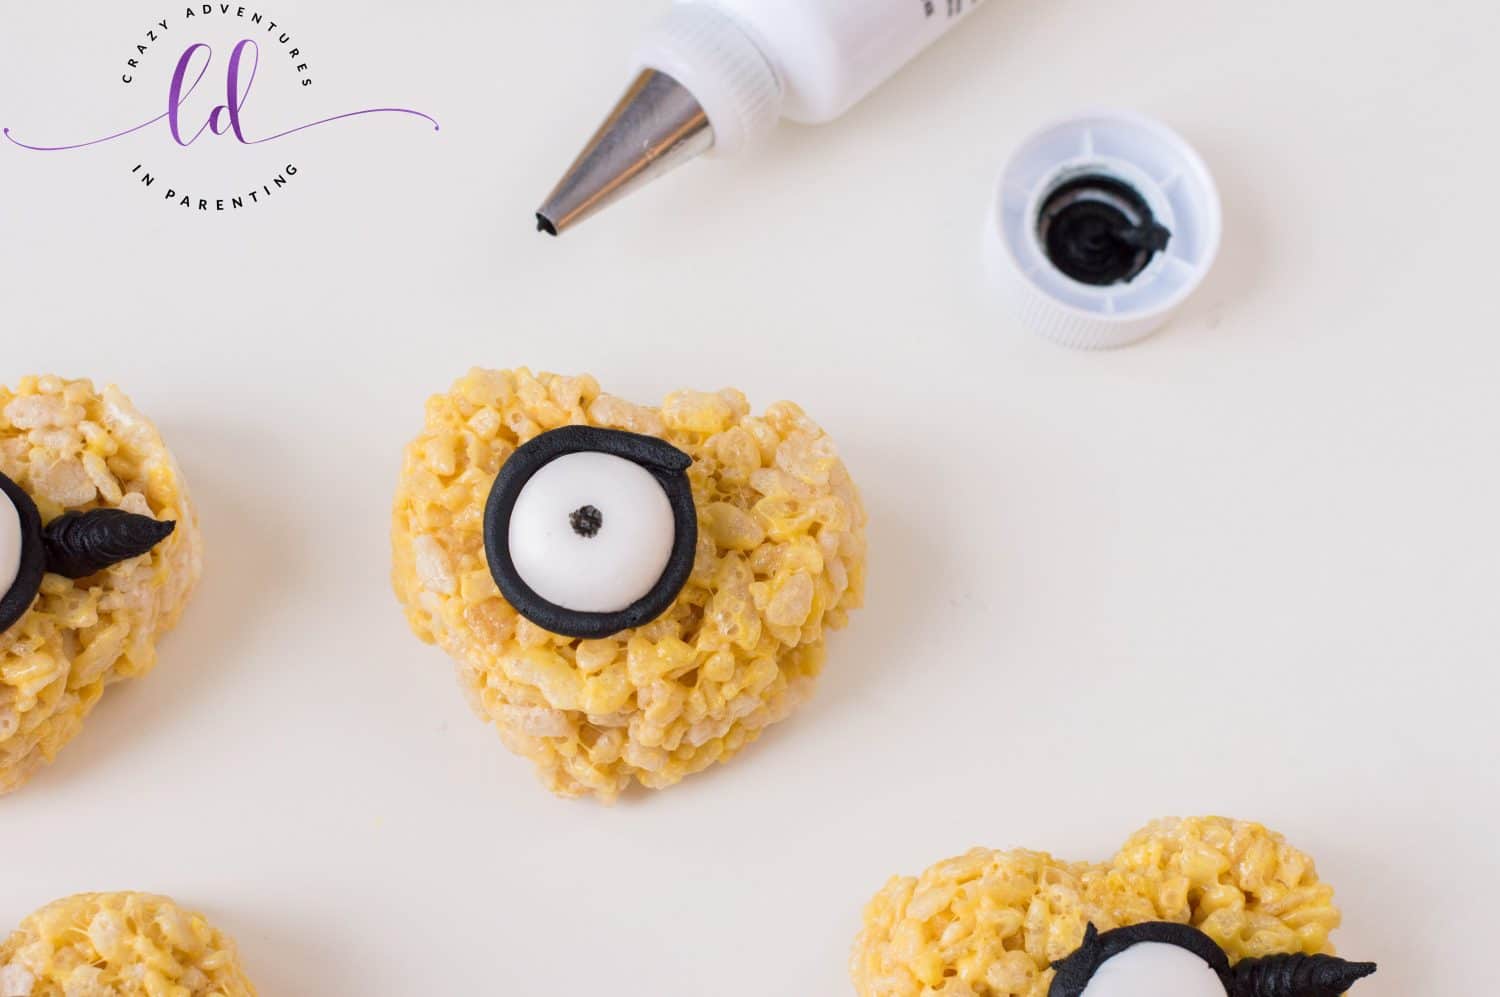 Pipe Frosting onto Minions Valentine's Rice Krispies Treats